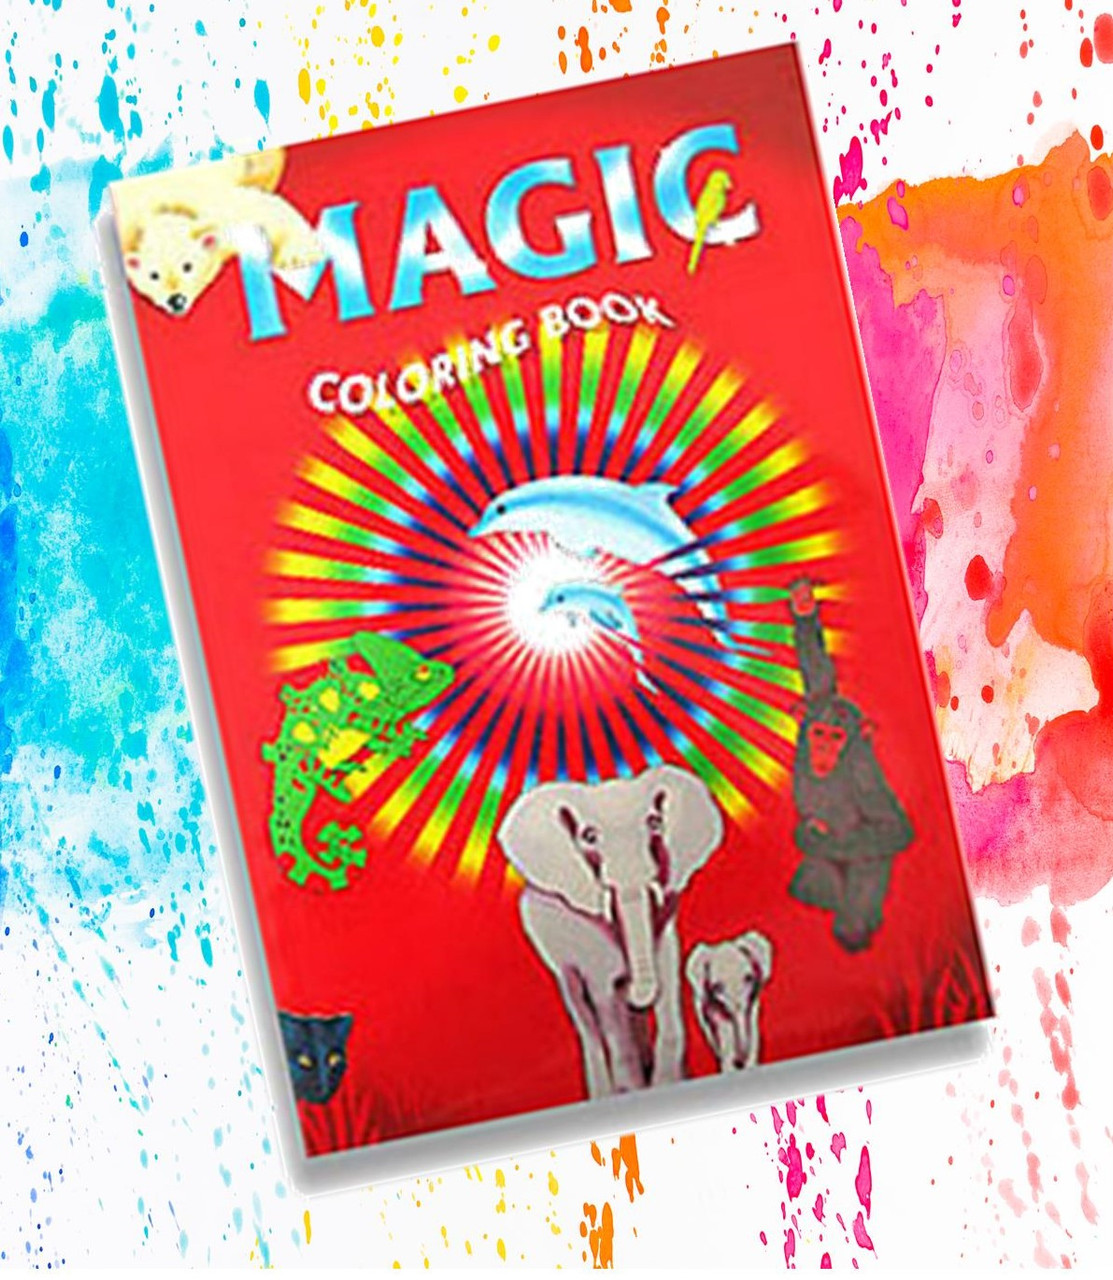 Animal Magic Colouring Book - LARGE - Pictures and colours magically appear  - God's wonderful creation